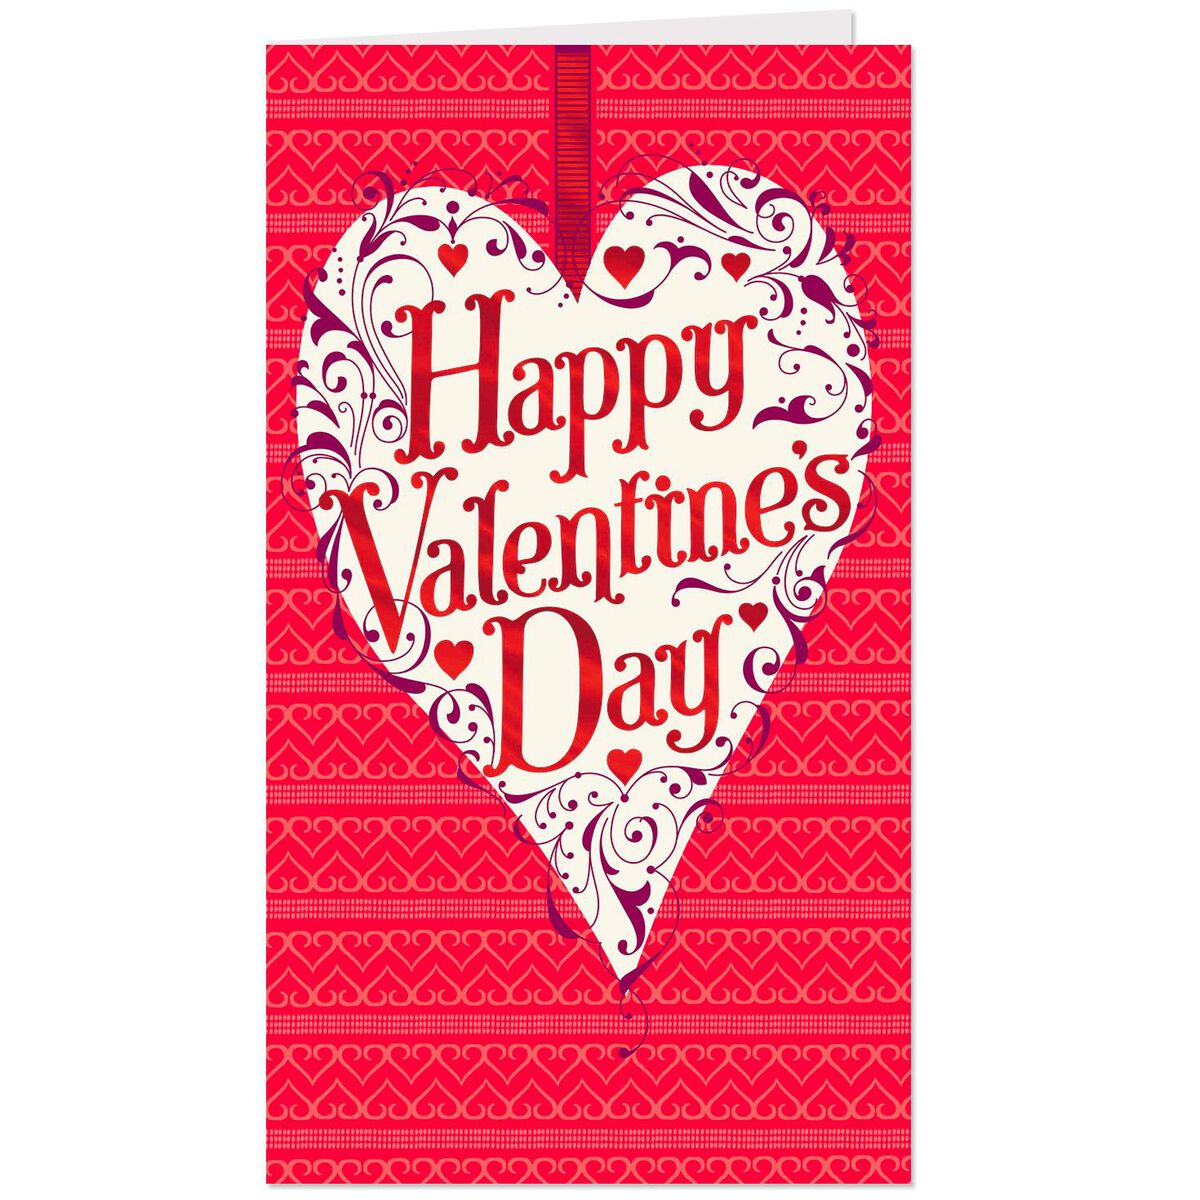 Sent With Love Valentines Day Cards Pack Of 6 Boxed Cards Hallmark